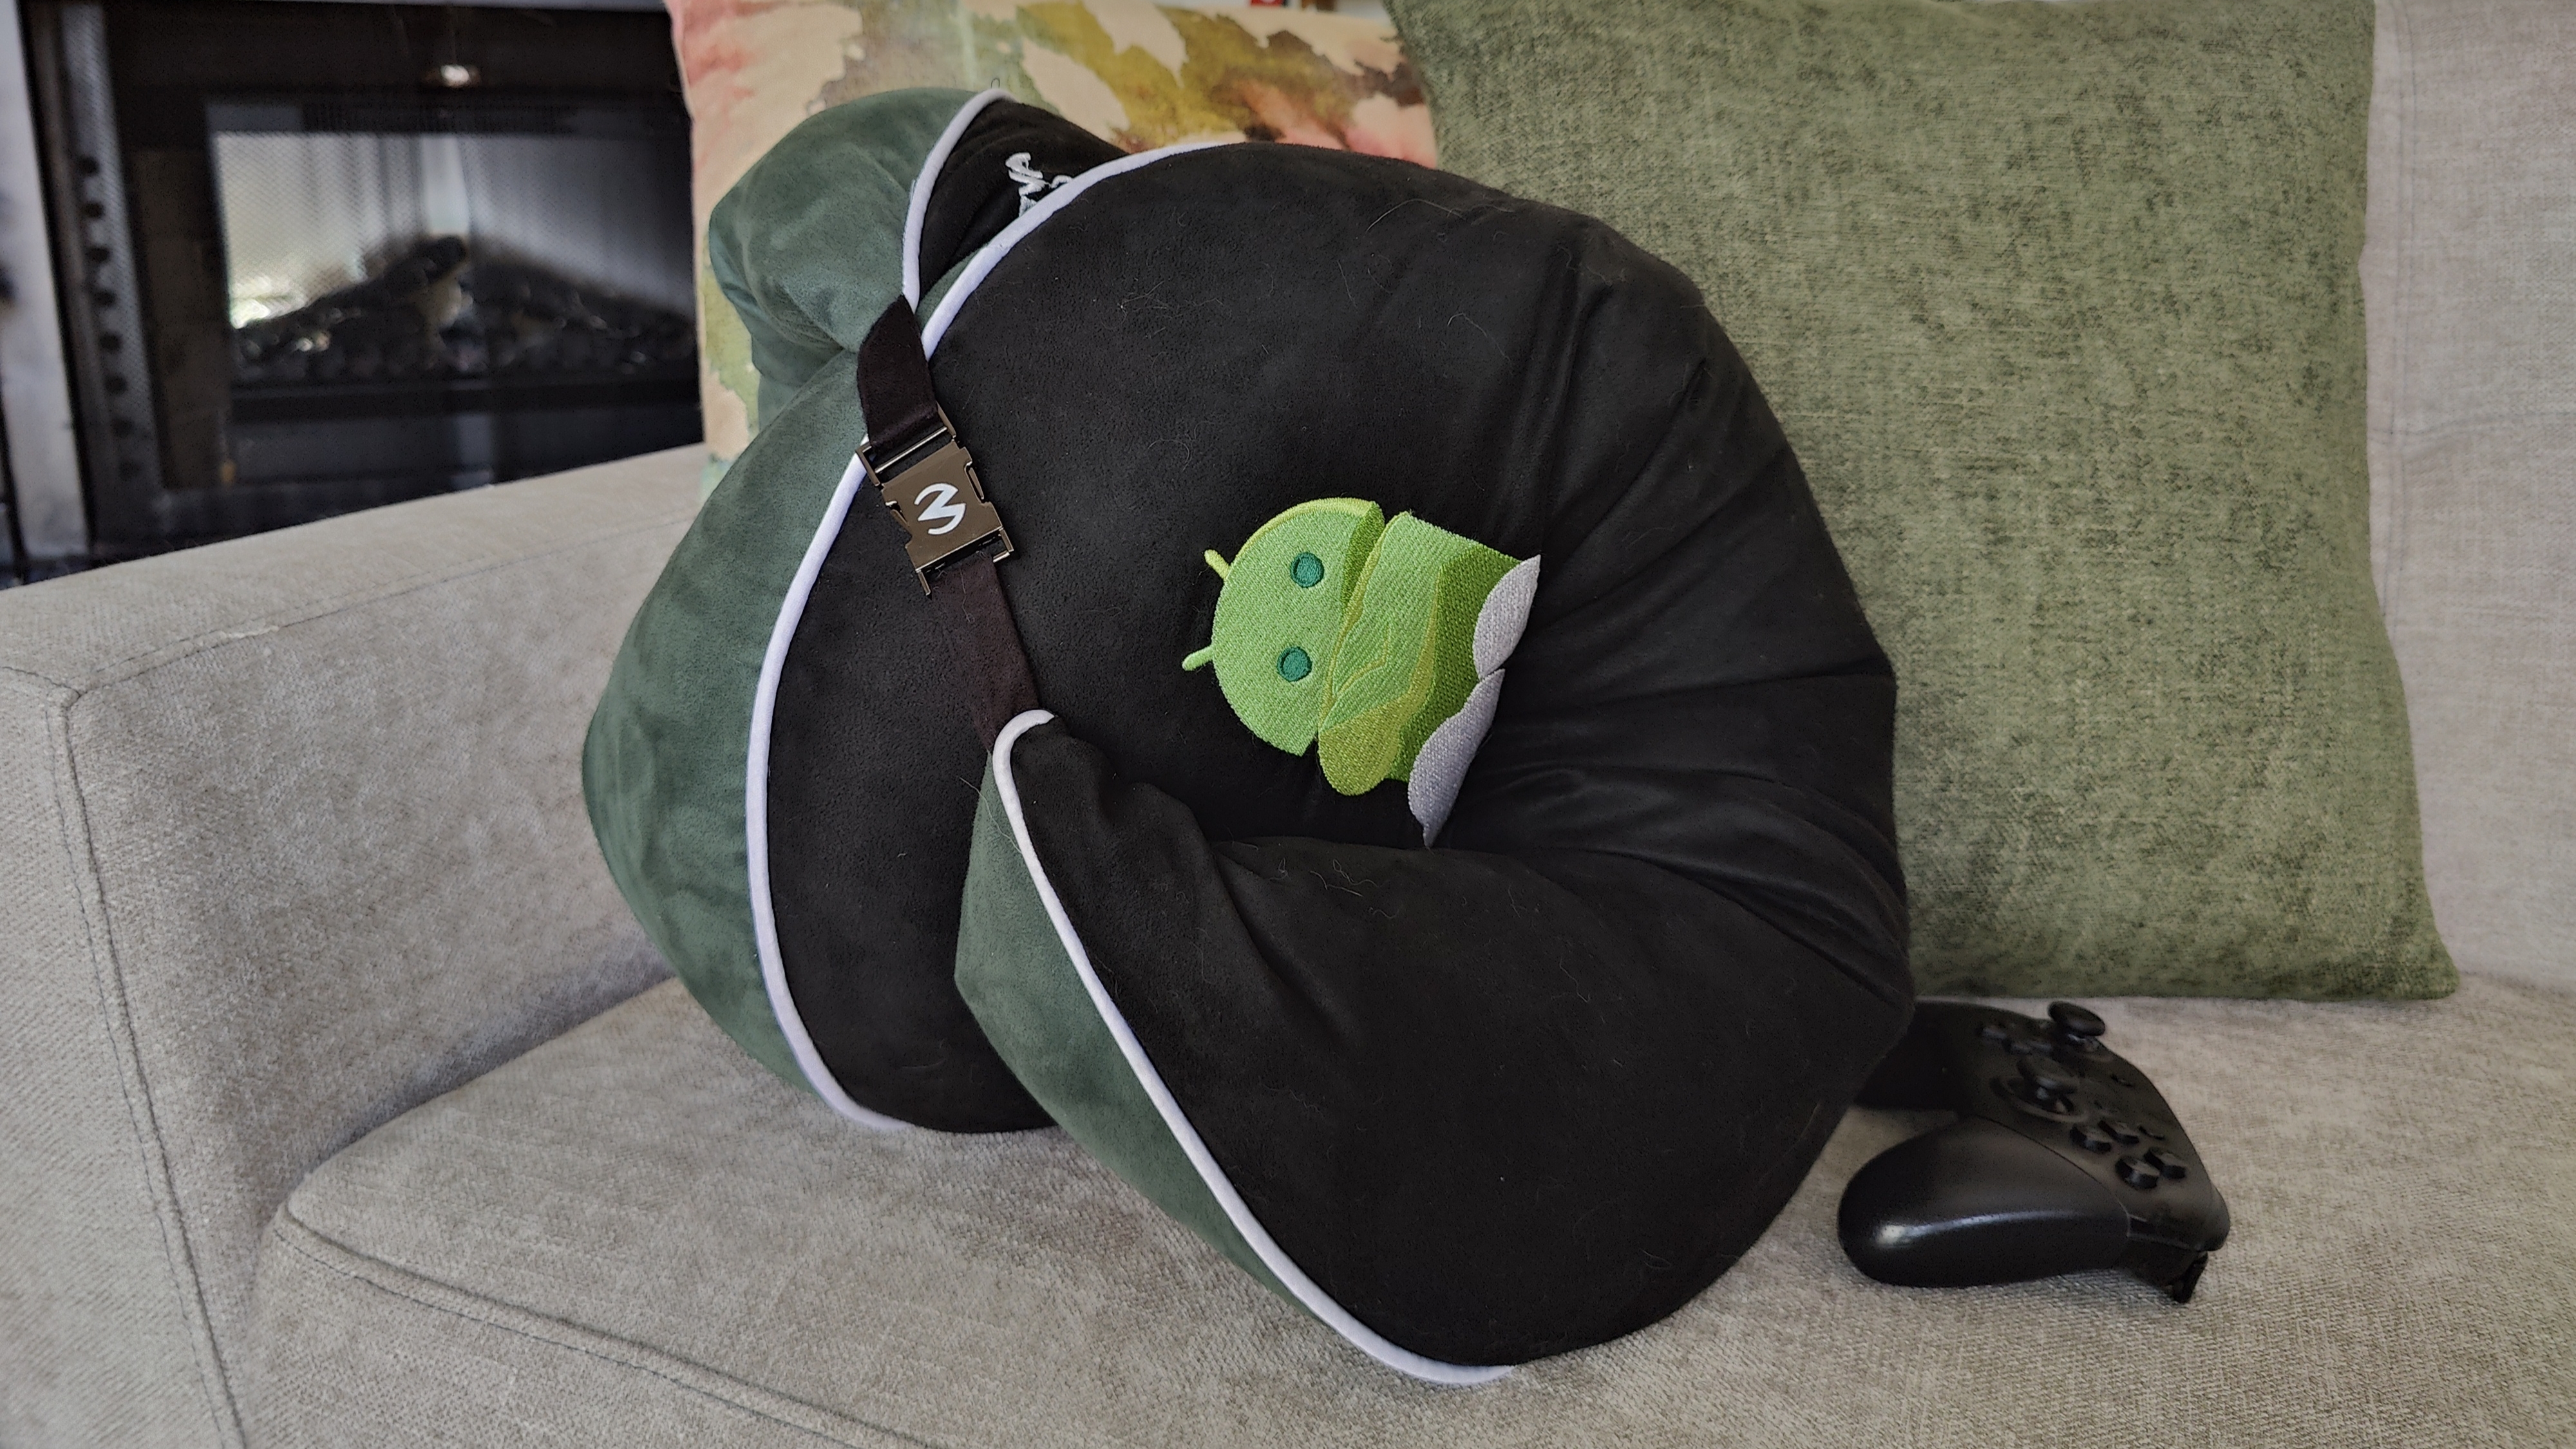 The Valari Gaming Pillow, folded up and clasped together.